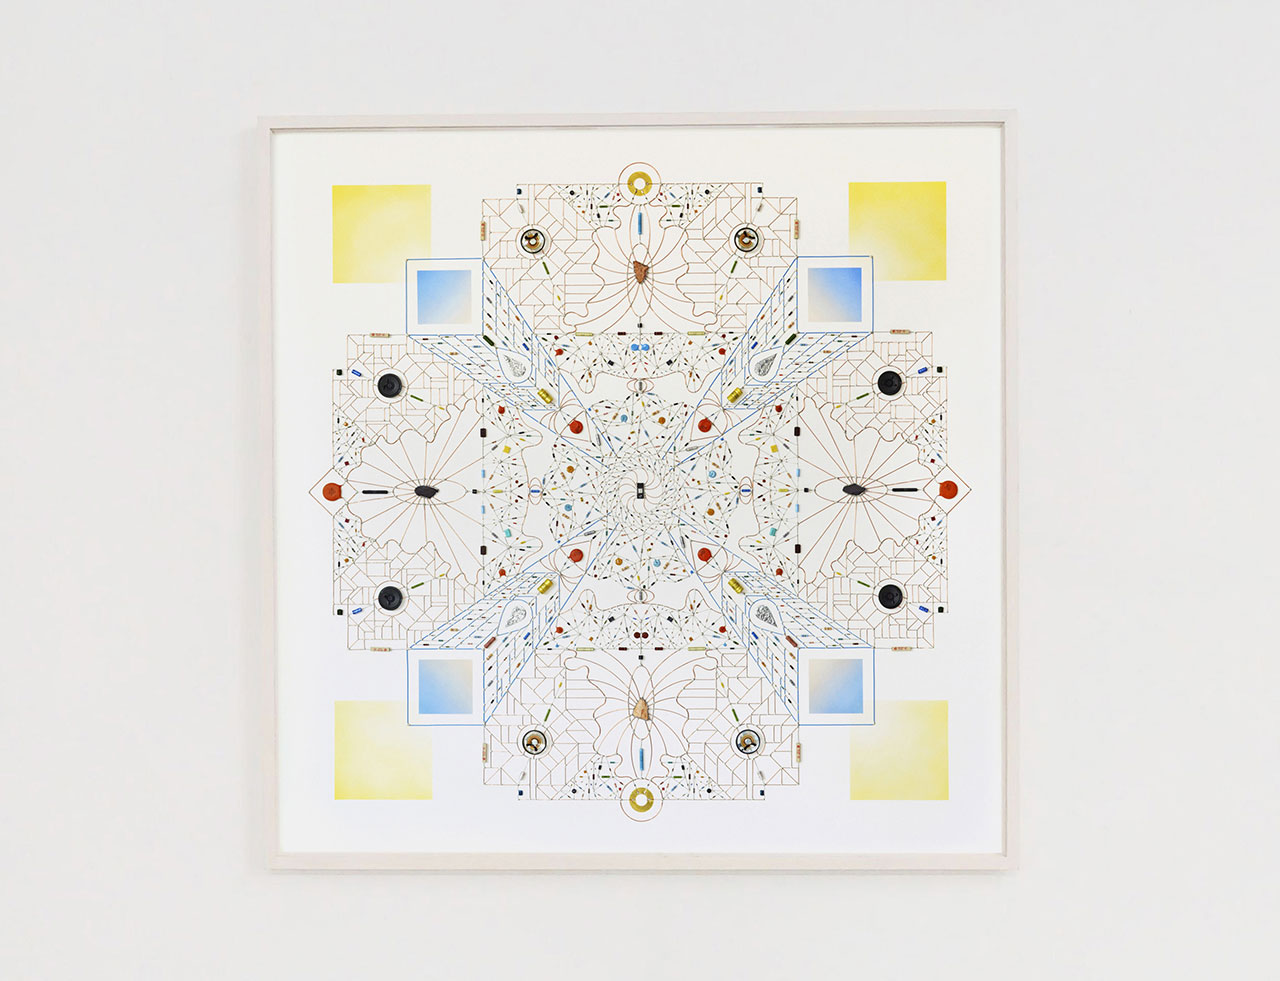 Technological Mandala 110 'Eye Collider', 2018. Electronic components, copper wires, varnish, lead, paper, acrylic paint, sand, speaker, stone, mdf,framed, 152x152x5,5 cm | 60x60x2¼  inches. Courtesy: The Flat – Massimo Carasi. Photo by The Flat.